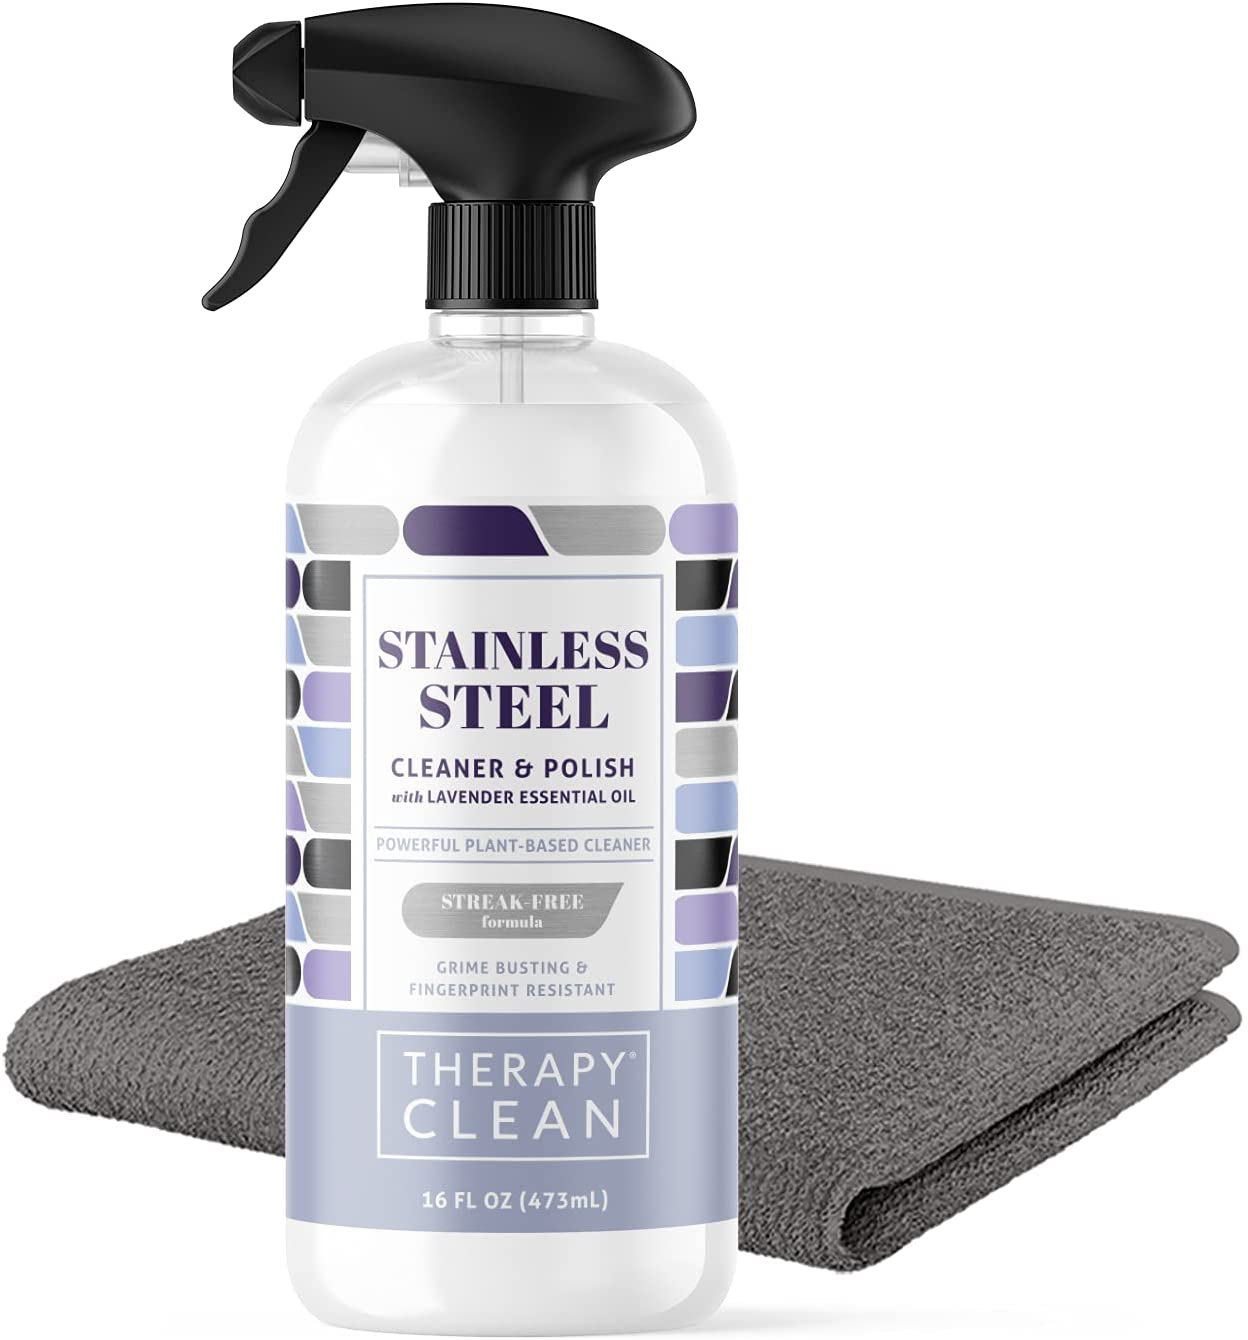 Therapy stainless steel cleaner kit, how to clean microwave